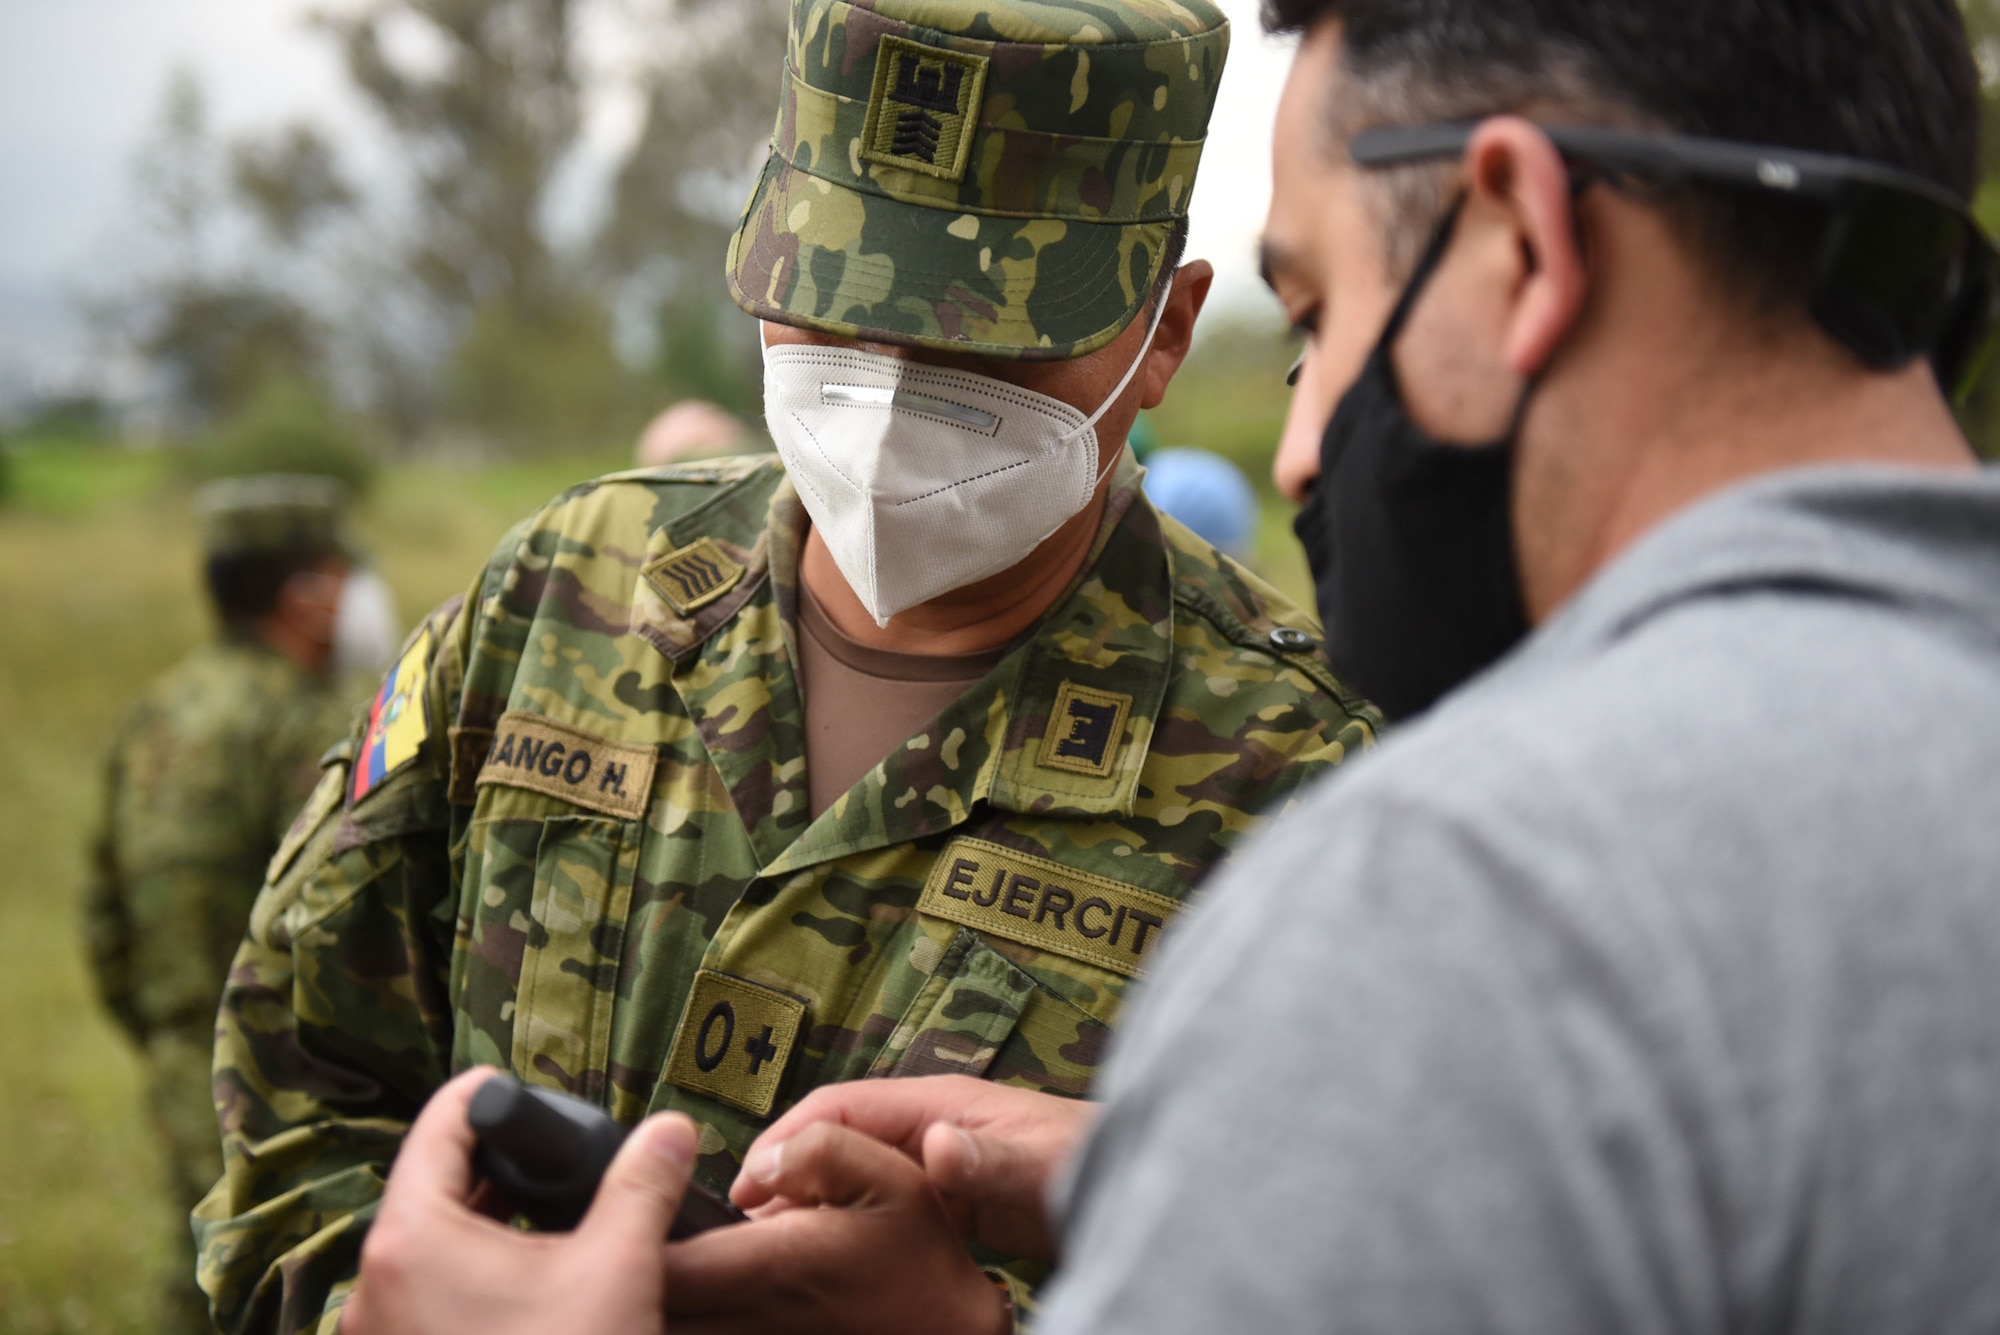 Tech Sgt. Oscar Morales, 7th Explosive Ordnance Disposal Flight, provides field training to Ecuadorian Army soldiers to use new demining equipment on Feb. 23, 2022, in Sangolquí, Ecuador. The equipment, from U.S. Southern Command, will be used to help clear the last remaining part of the country's southern border so it can be returned to the local population for farming and other activities. (U.S. Air National Guard photo by Lt. Col. Allison Stephens)